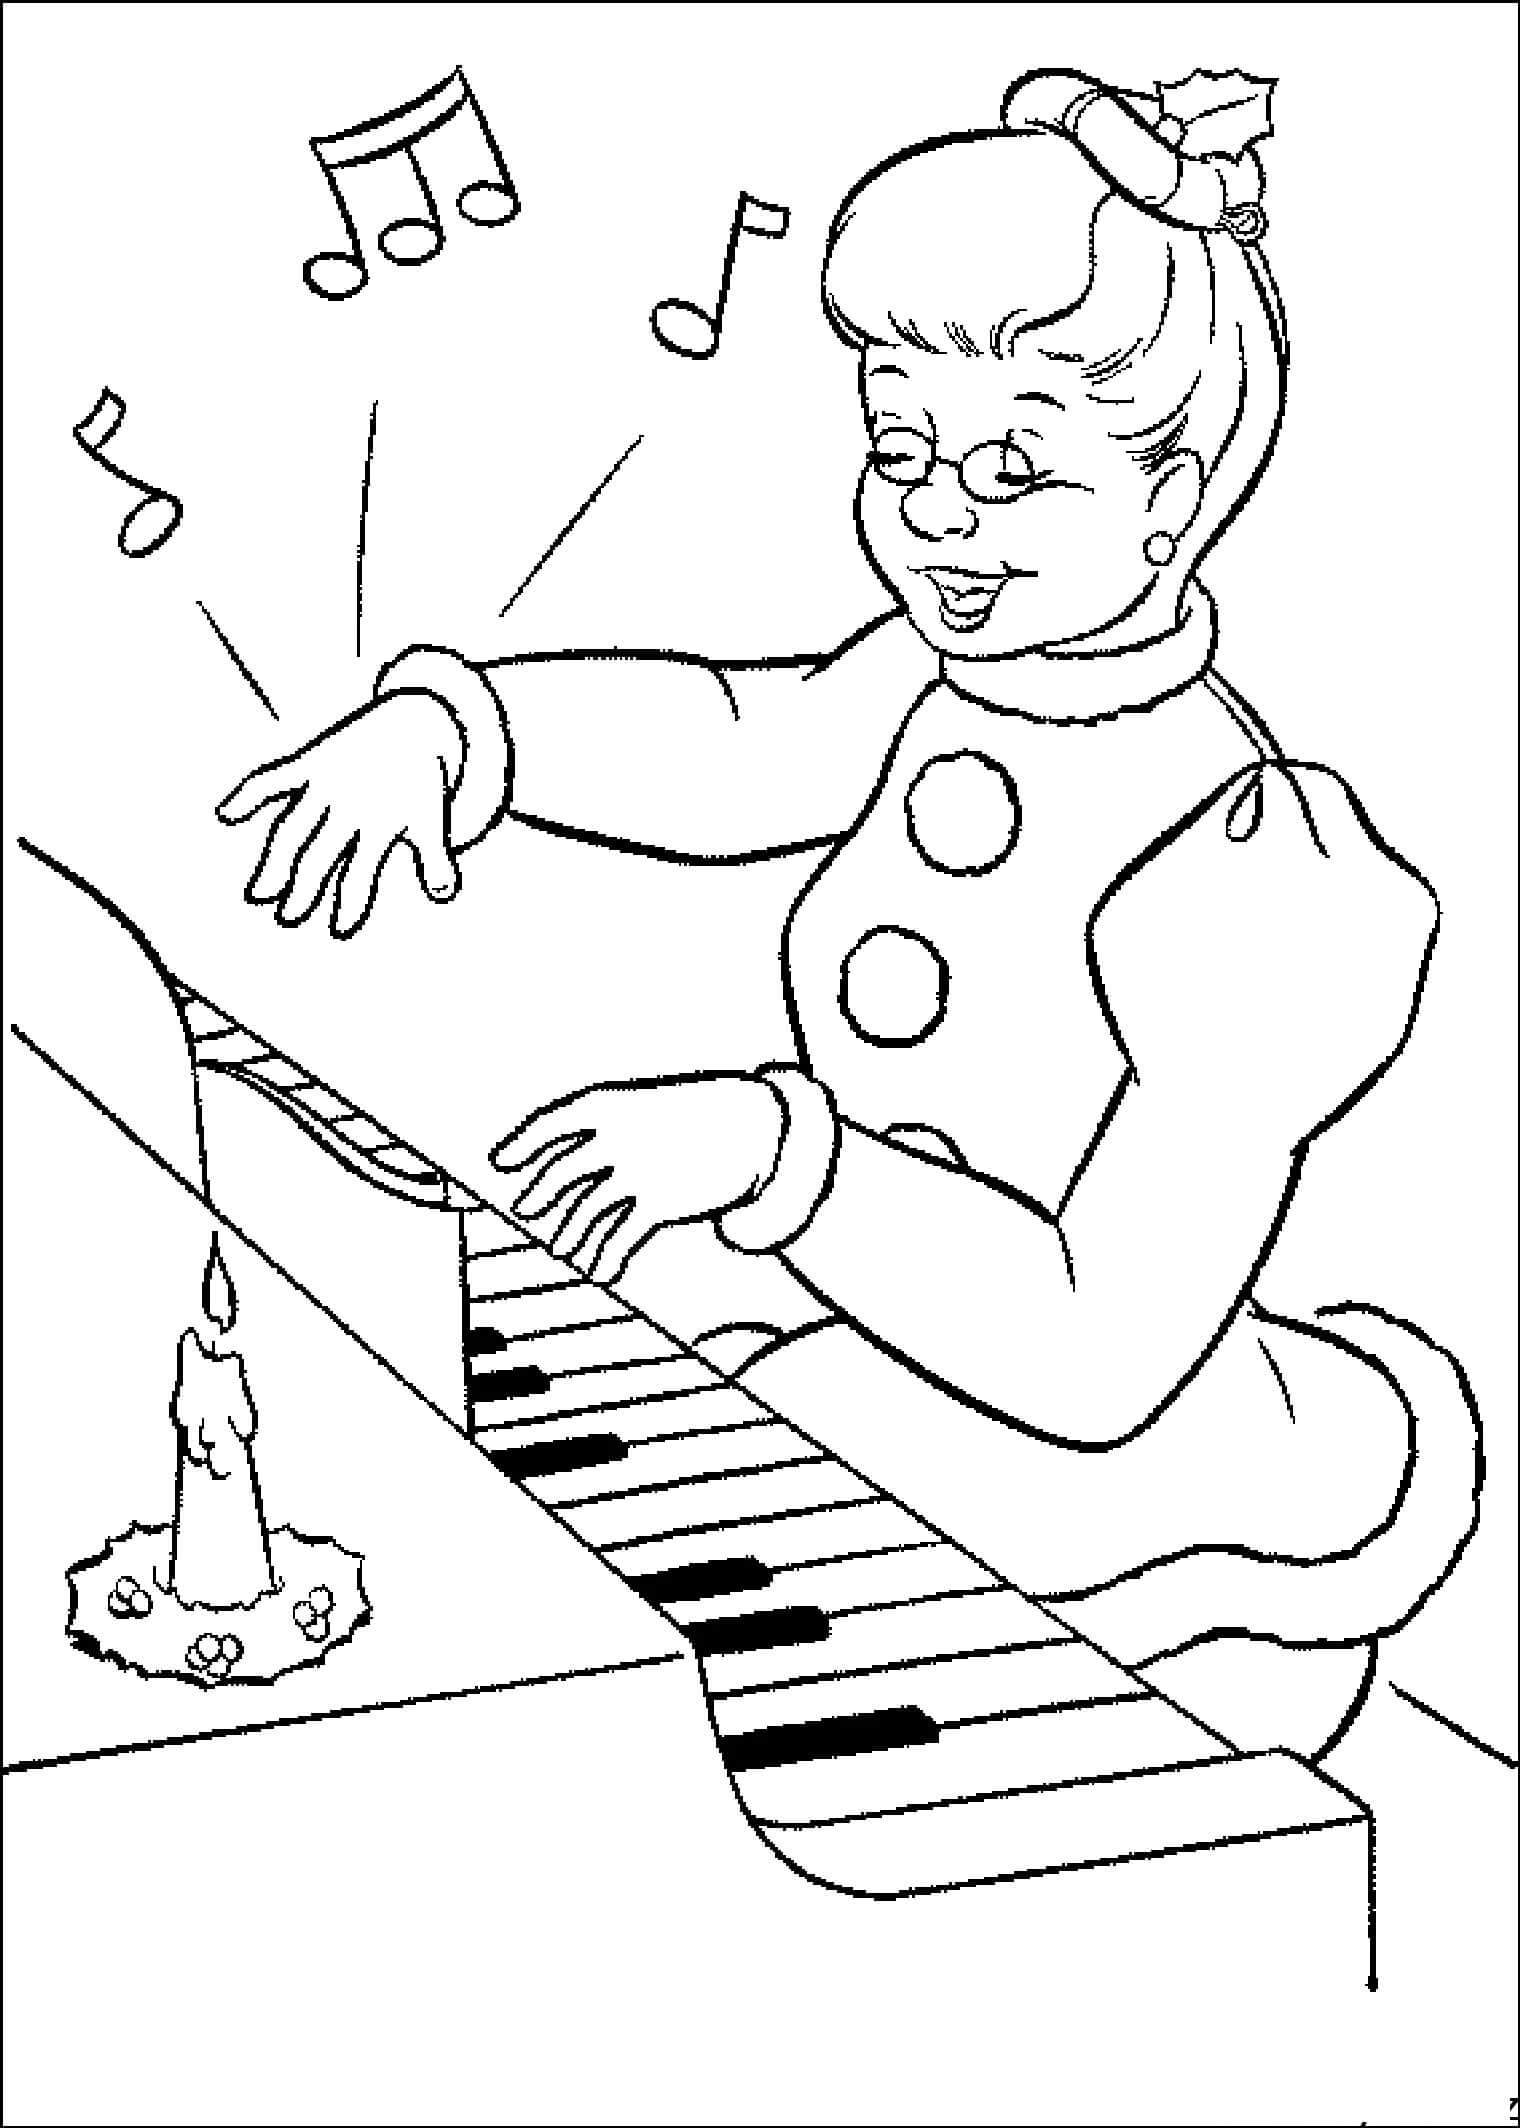 fun-girl-playing-piano-coloring-page-download-print-or-color-online